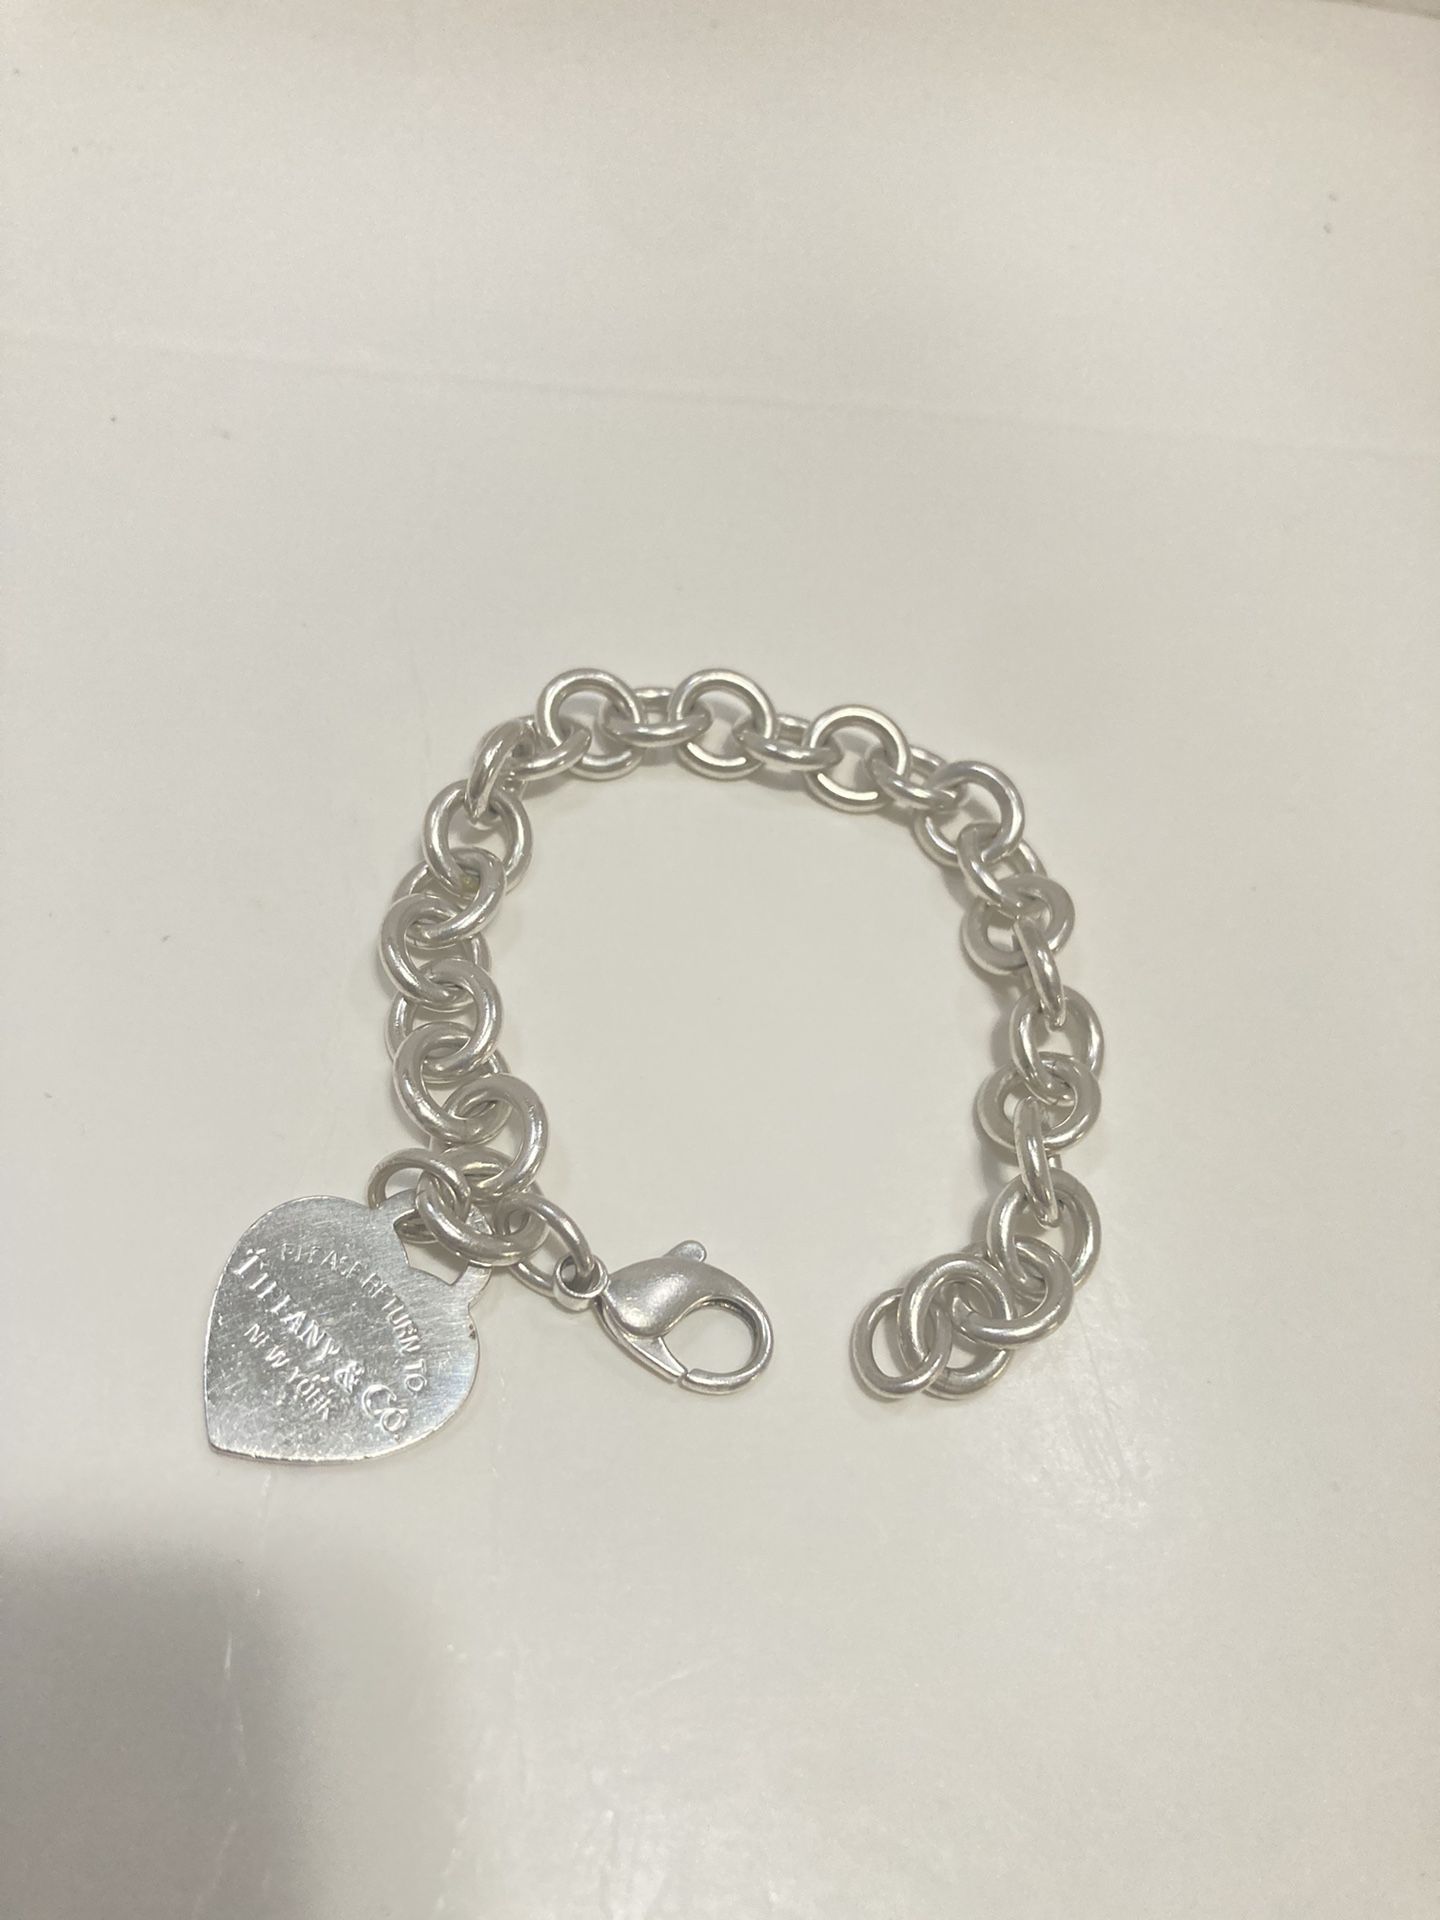 Authentic Tiffany And Co. Sterling Silver 925 Bracelet 